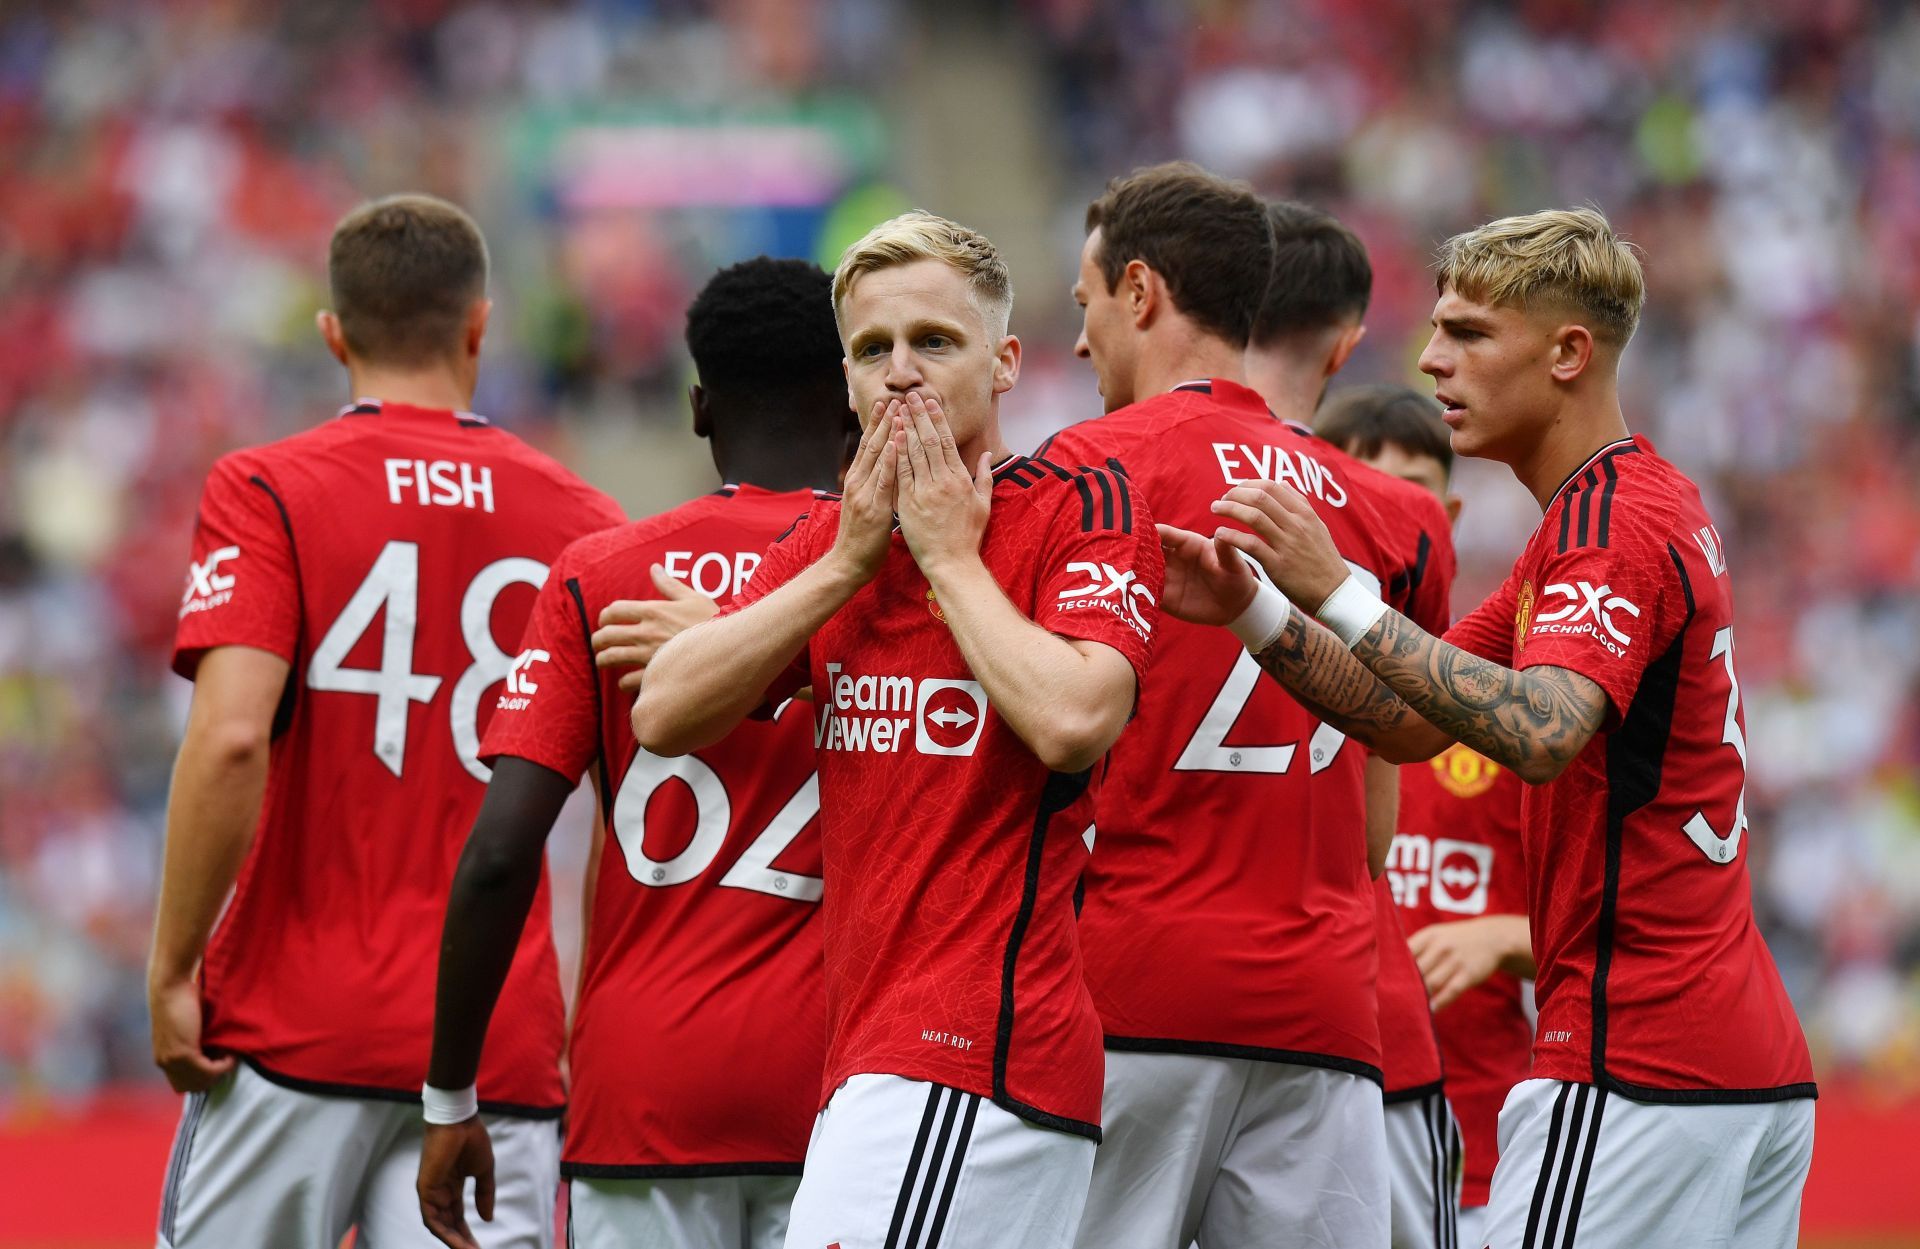 Donny van de Beek is likely to leave Old Trafford this summer.